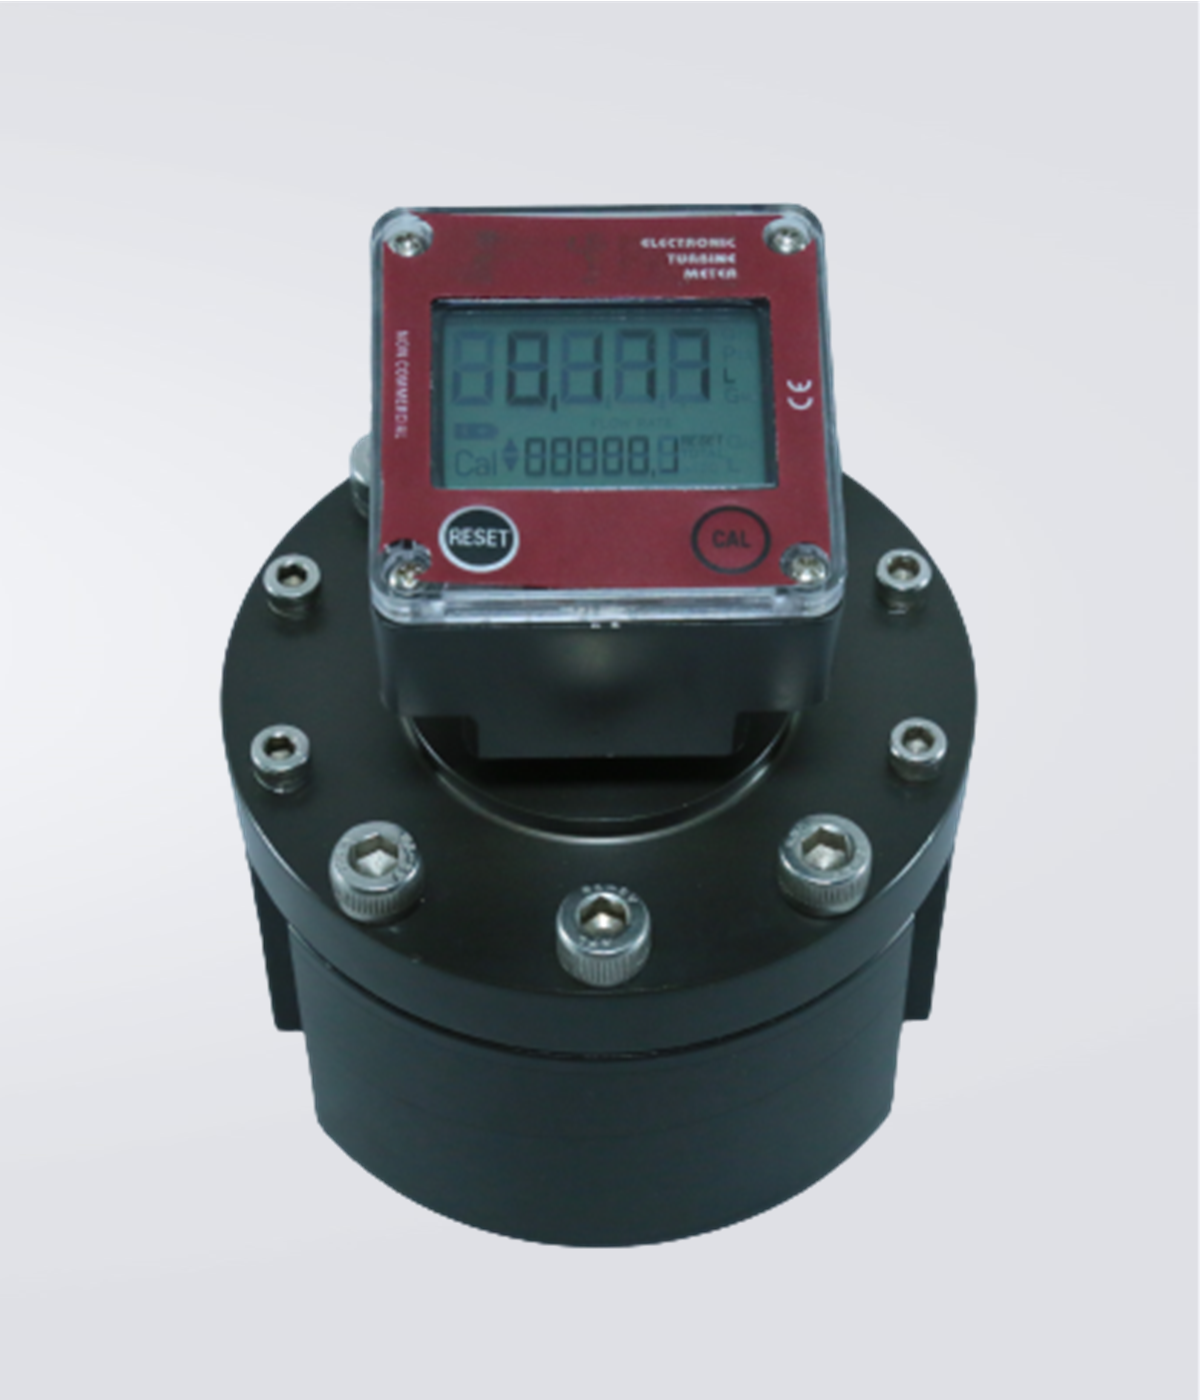 Oval Gear Flow Transmitter with Battery operated Display